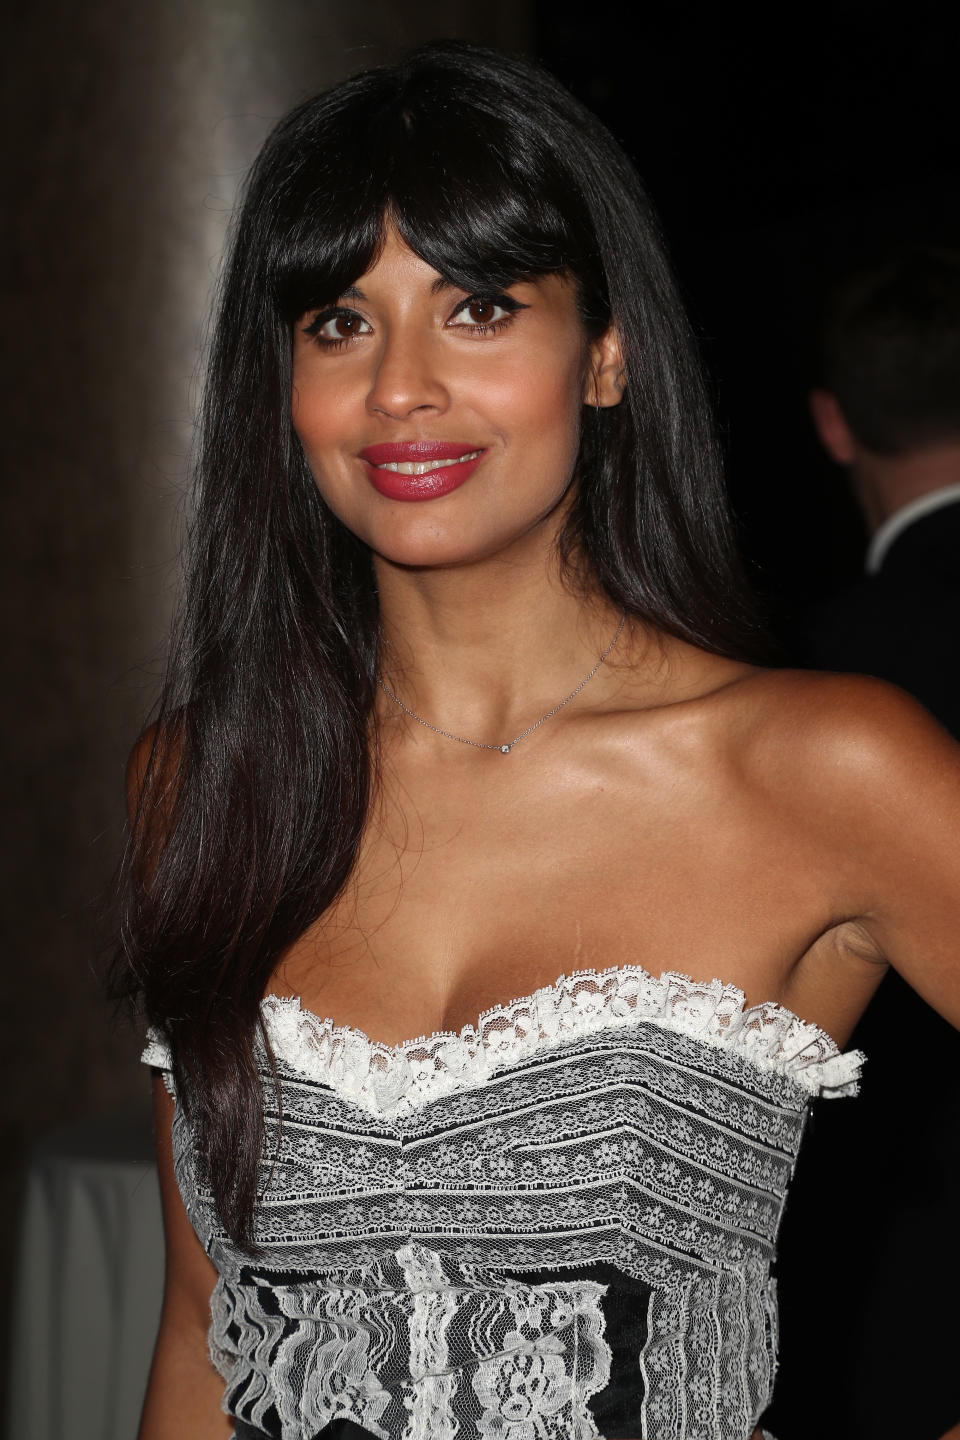 Jameela Jamil didn’t appreciate a fellow gym-goer criticizing her body. (Photo: Frederick M. Brown/Getty Images)